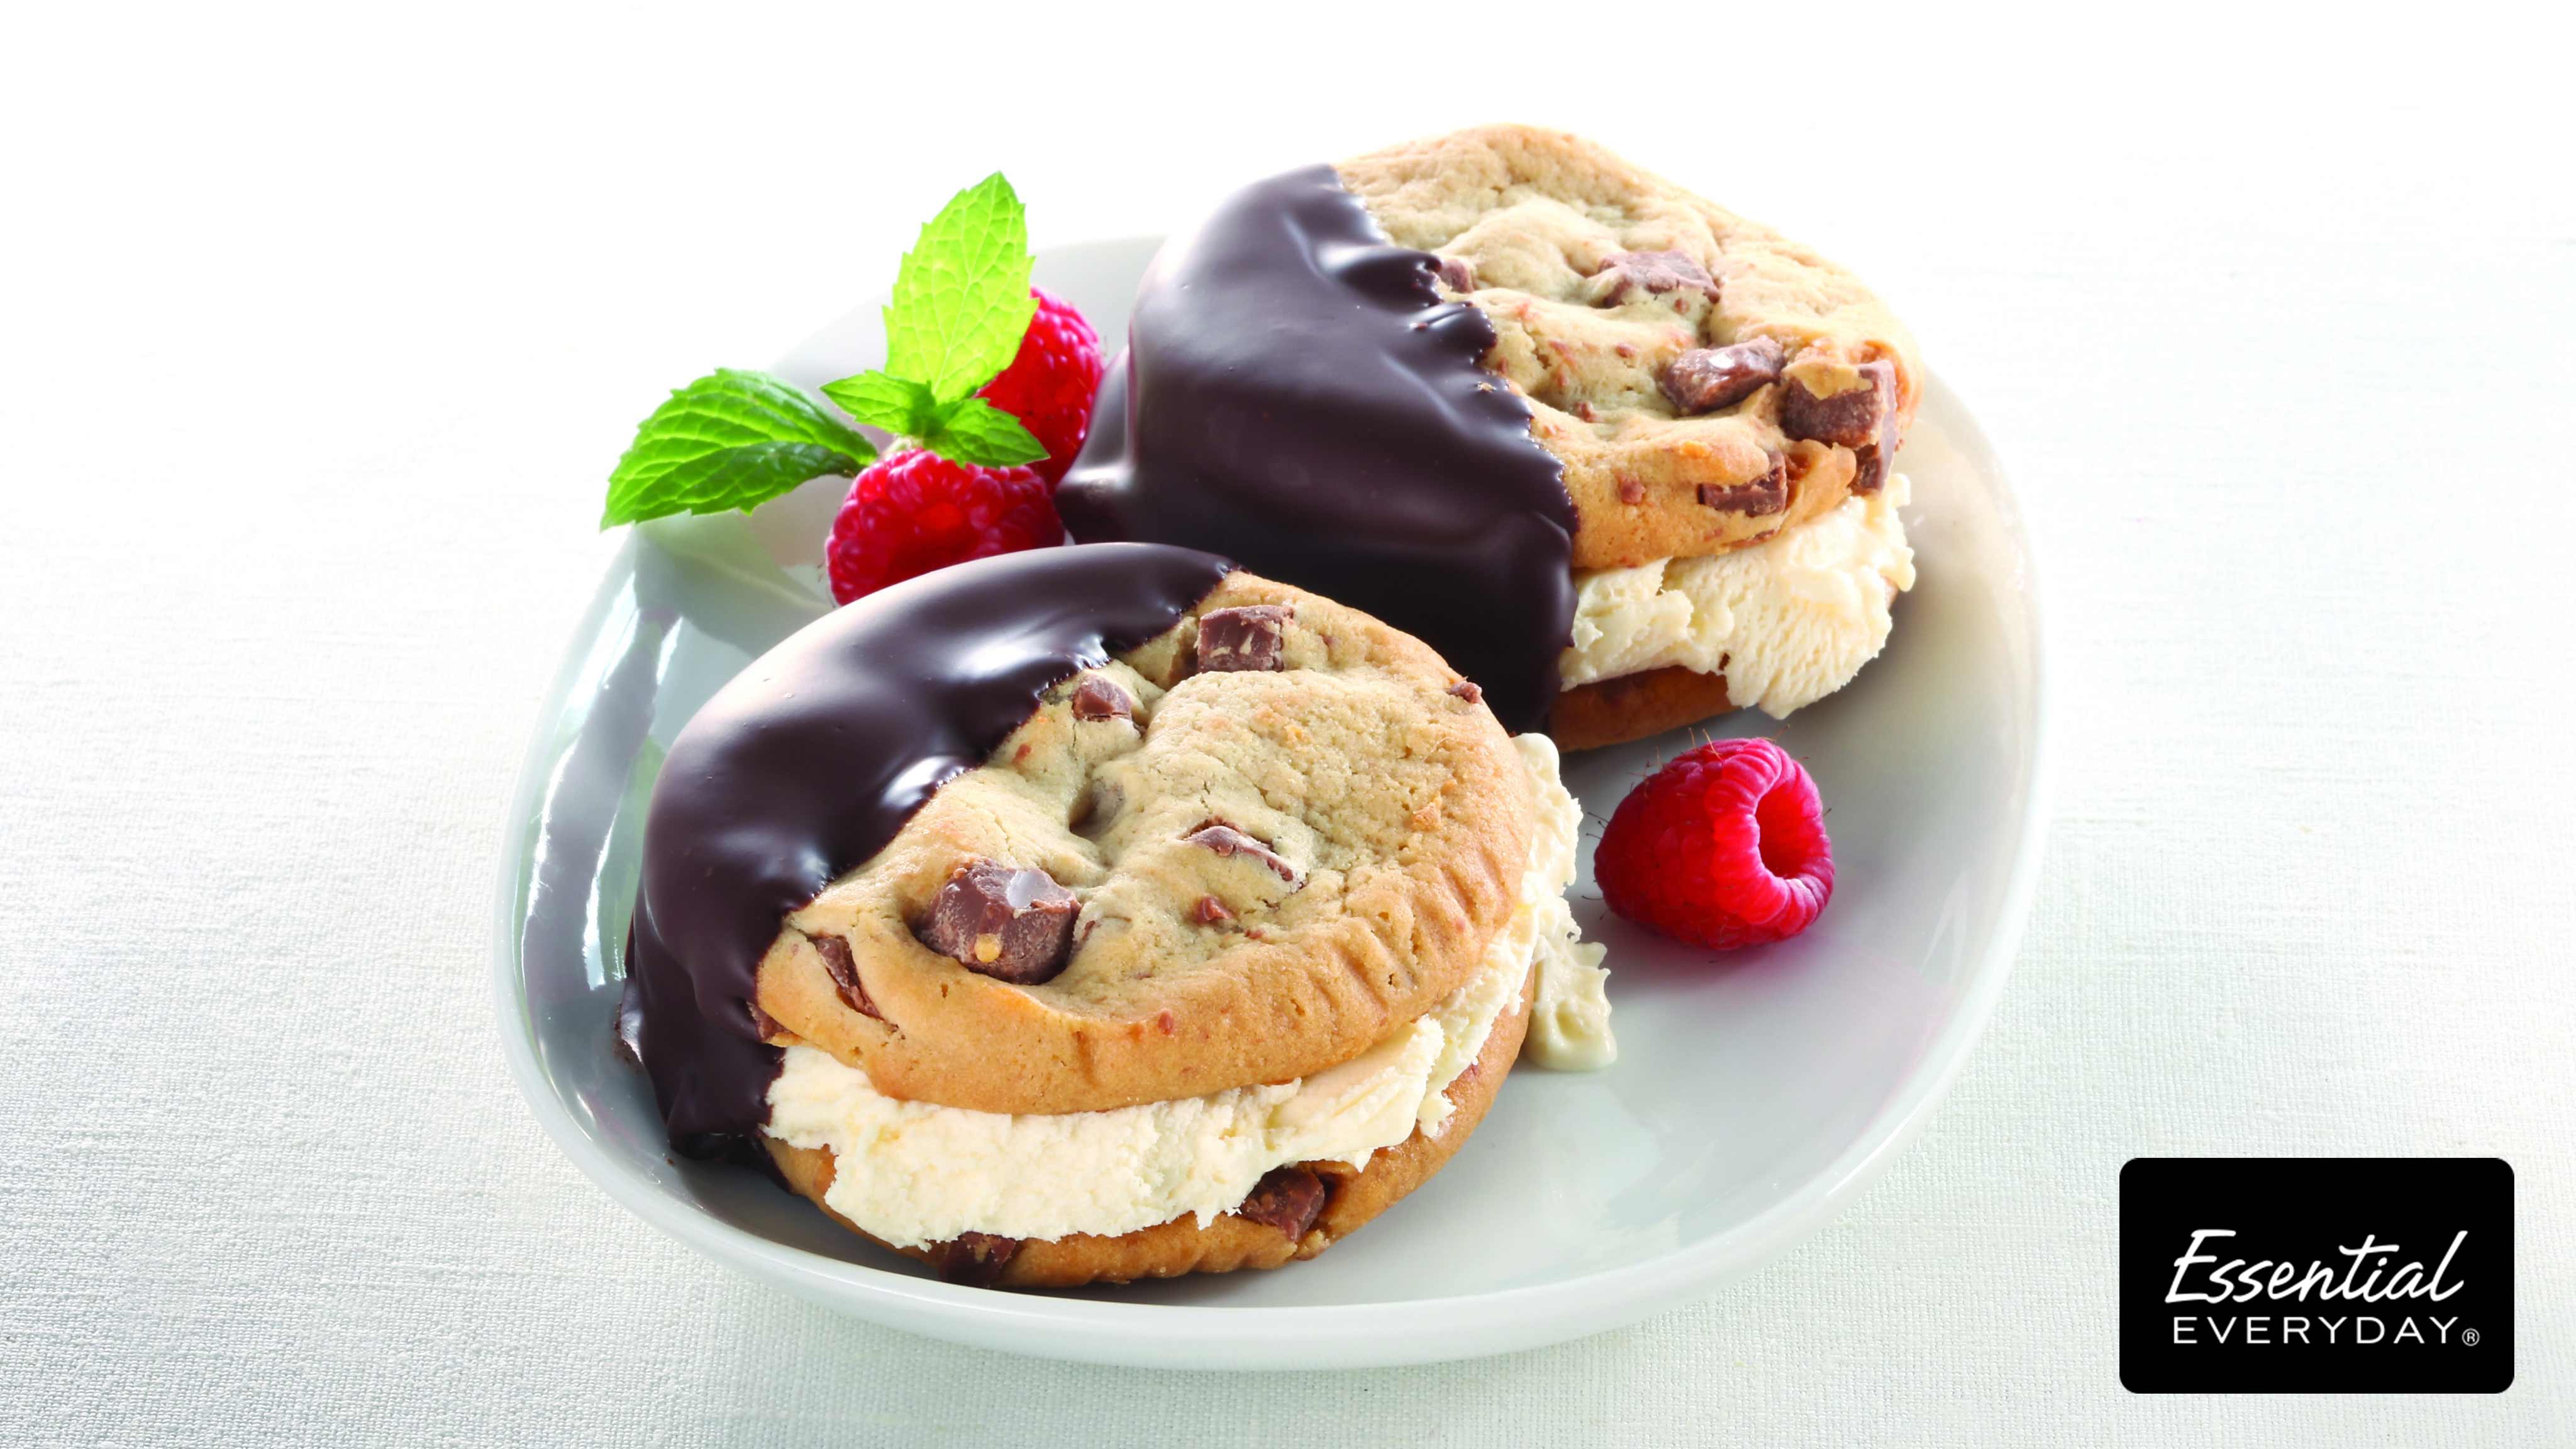 Image for Recipe Chocolate Dipped Ice Cream Sandwiches